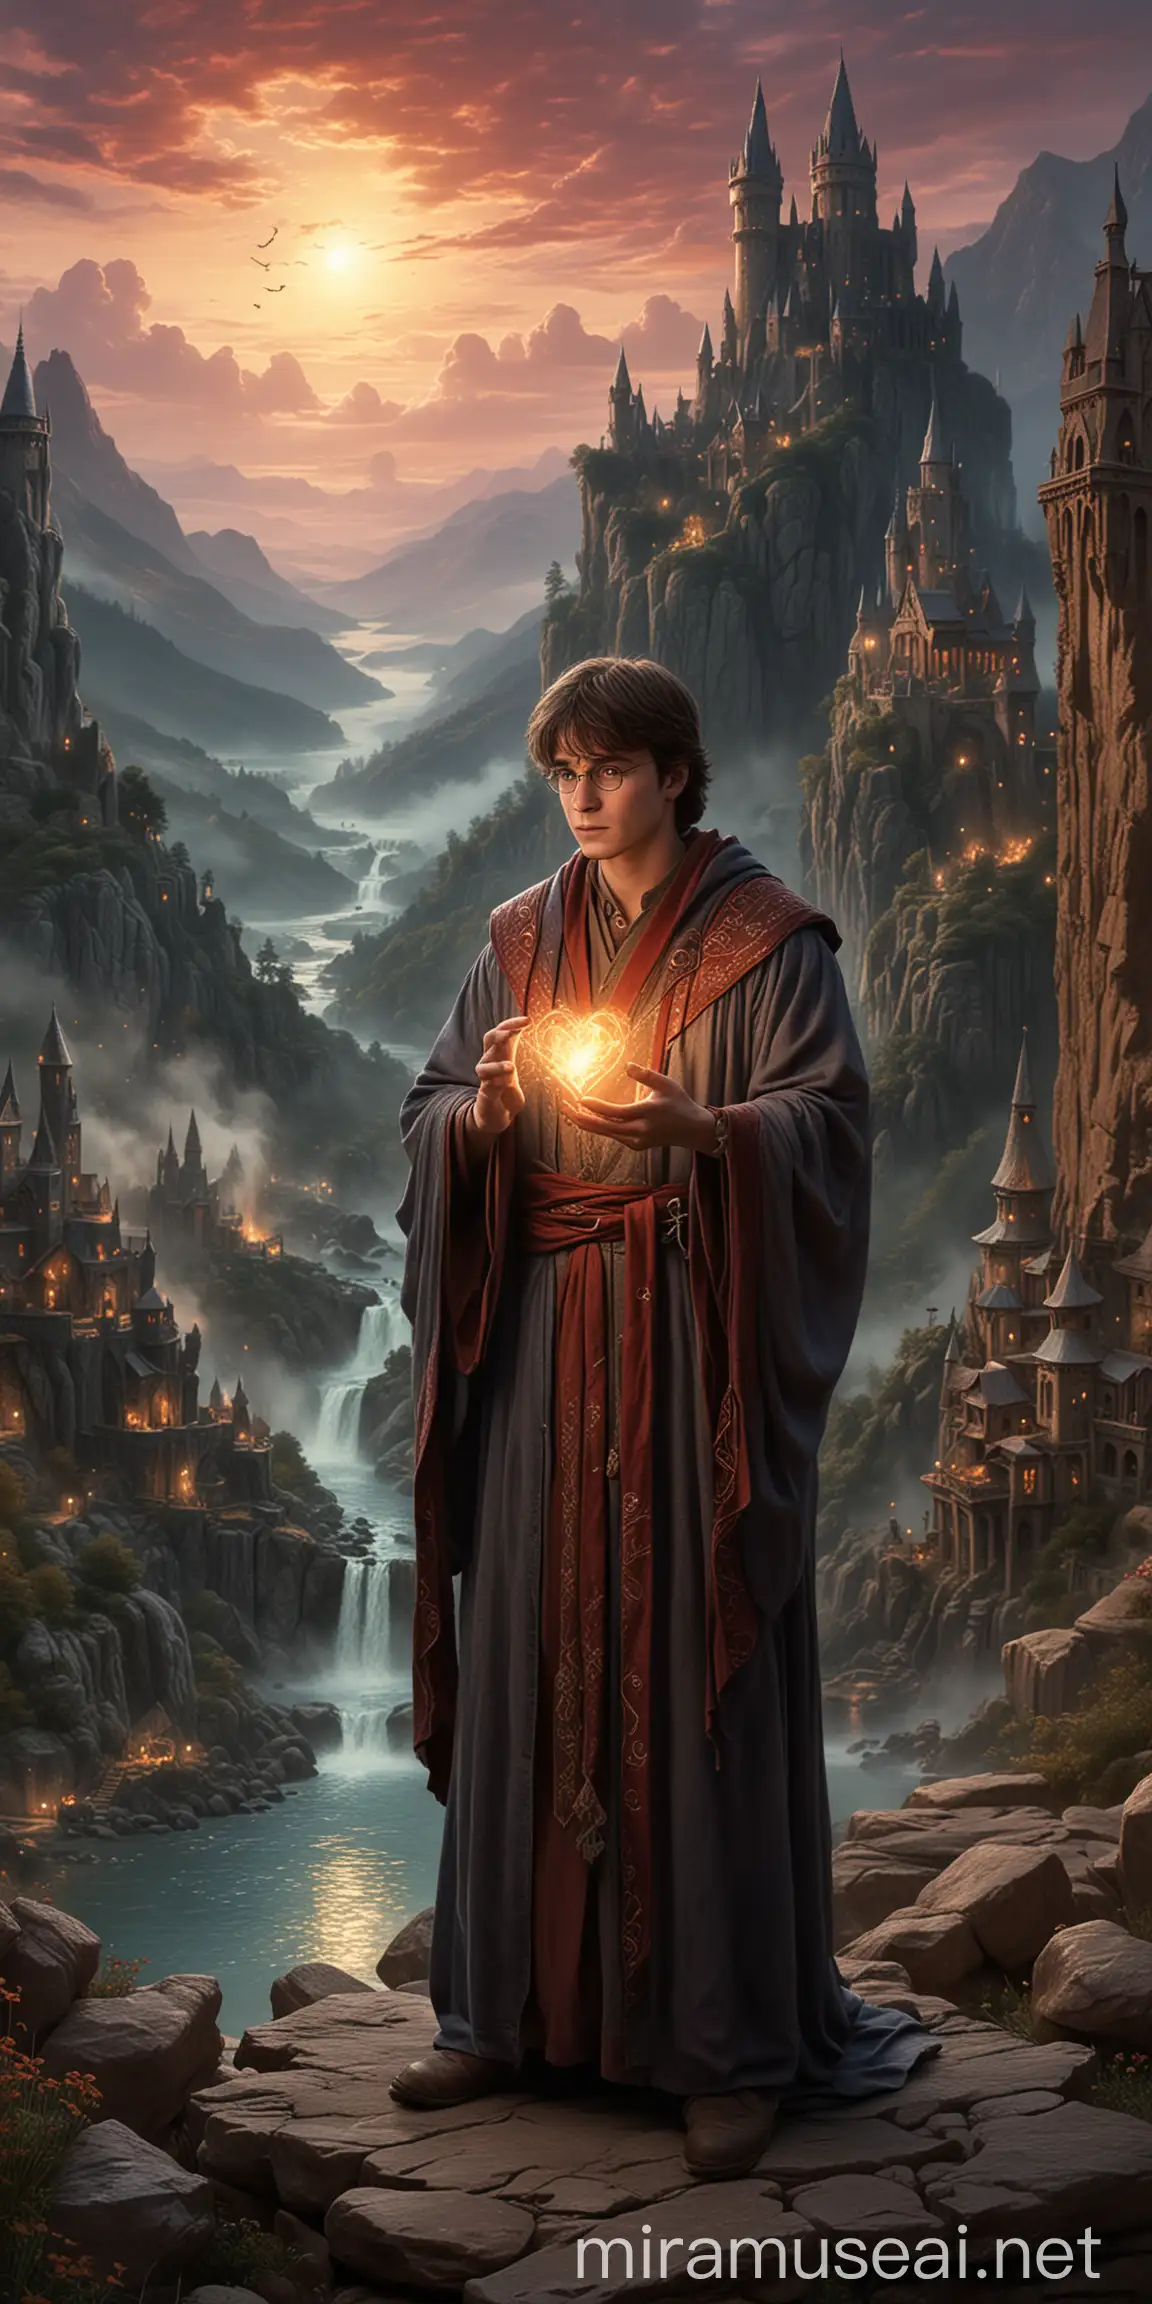 The main character of the image is the wizard Harry Potter holding a heart. This wizard is depicted with distinct features that evoke a sense of fantasy and magic.
The background of the image is reminiscent of a mythical realm from Game of Thrones, particularly with elements from House of the Dragon. This setting enhances the mystical atmosphere, combining ancient architecture and dramatic landscapes.
the background is rich in detail: rocky mountains, cascading waterfalls and ancient ruins are bathed in a magical twilight glow. These elements create a charming and mysterious atmosphere for the scene. The style is illustrative and fantastical, with bright colors that highlight the wizard's robes and the heart he holds, contrasting with the darker, more muted tones of the background. This color scheme highlights the central figure and creates visual interest.
Action/items: The wizard is in a contemplative pose, gently clutching a glowing heart that emits a soft ethereal light. The heart symbolizes love and magic, adding depth to the narrative of the image.
Costume/Appearance: The wizard's costume is an intricate robe adorned with mystical symbols and designs that enhance his magical aura. His appearance is charismatic and mysterious, captivating viewers into a fantasy world.
In addition to the heart, the wizard carries a wand at his side, which further emphasizes his magical prowess and adds a touch of authenticity to his character.